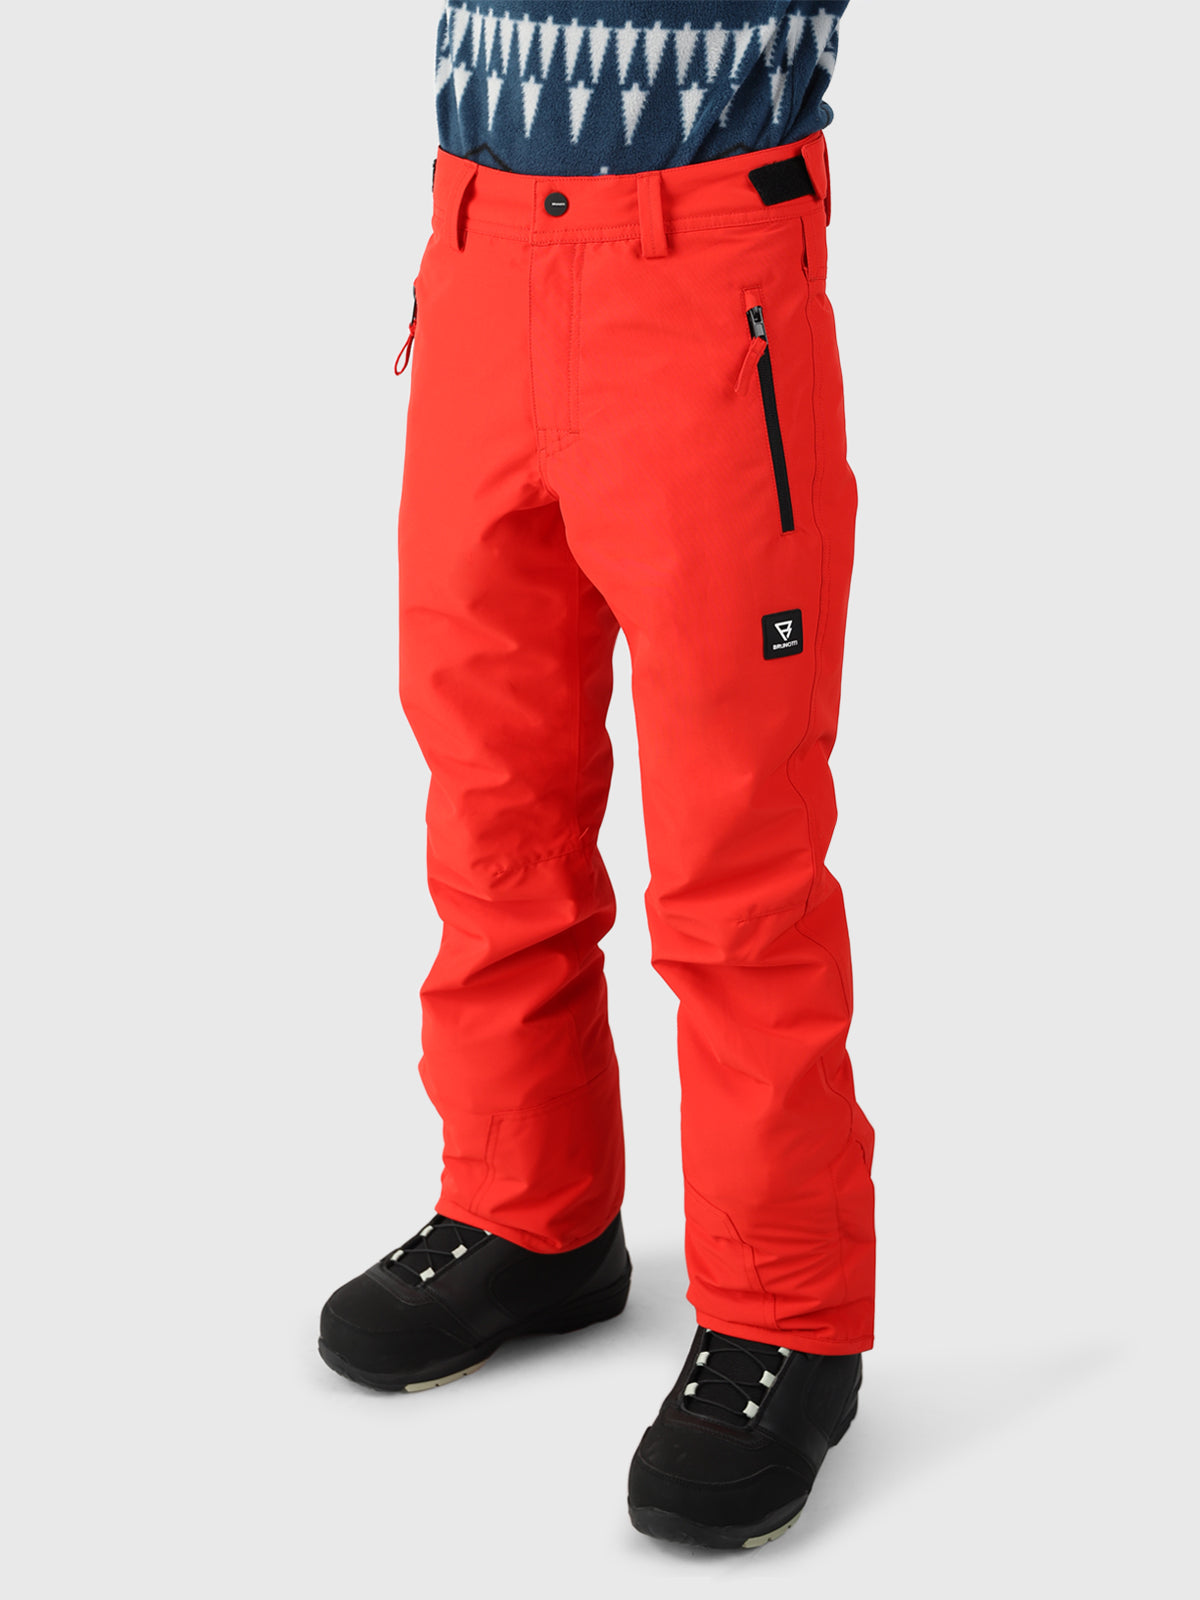 Footraily Boys Snow Pants | Red